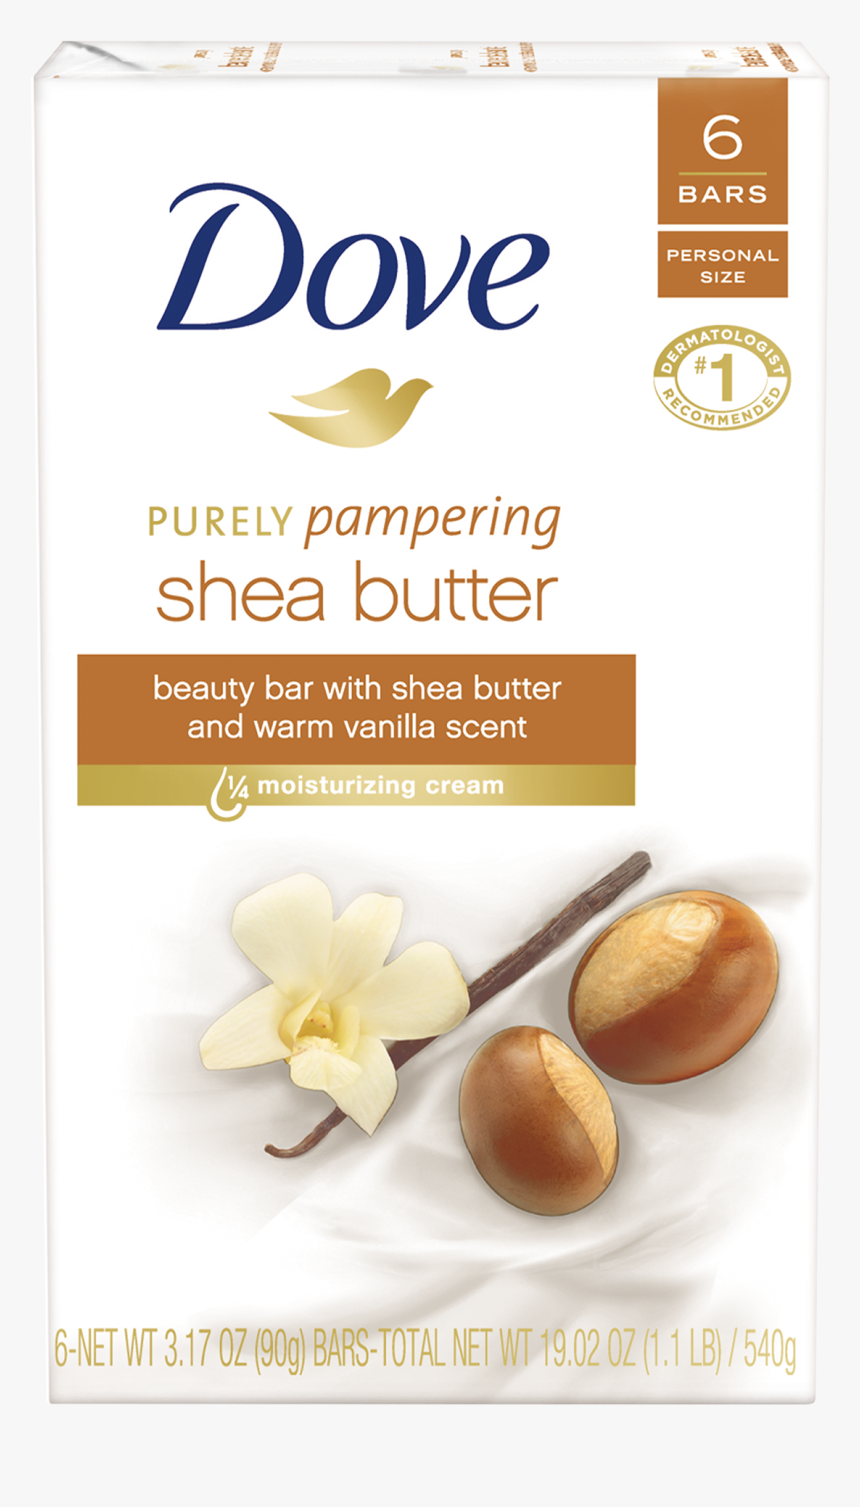 Dove Purely Pampering Shea Butter Beauty Bar 4 Oz 6pk - Dove Shea Butter Bar Soap 6 Pack, HD Png Download, Free Download